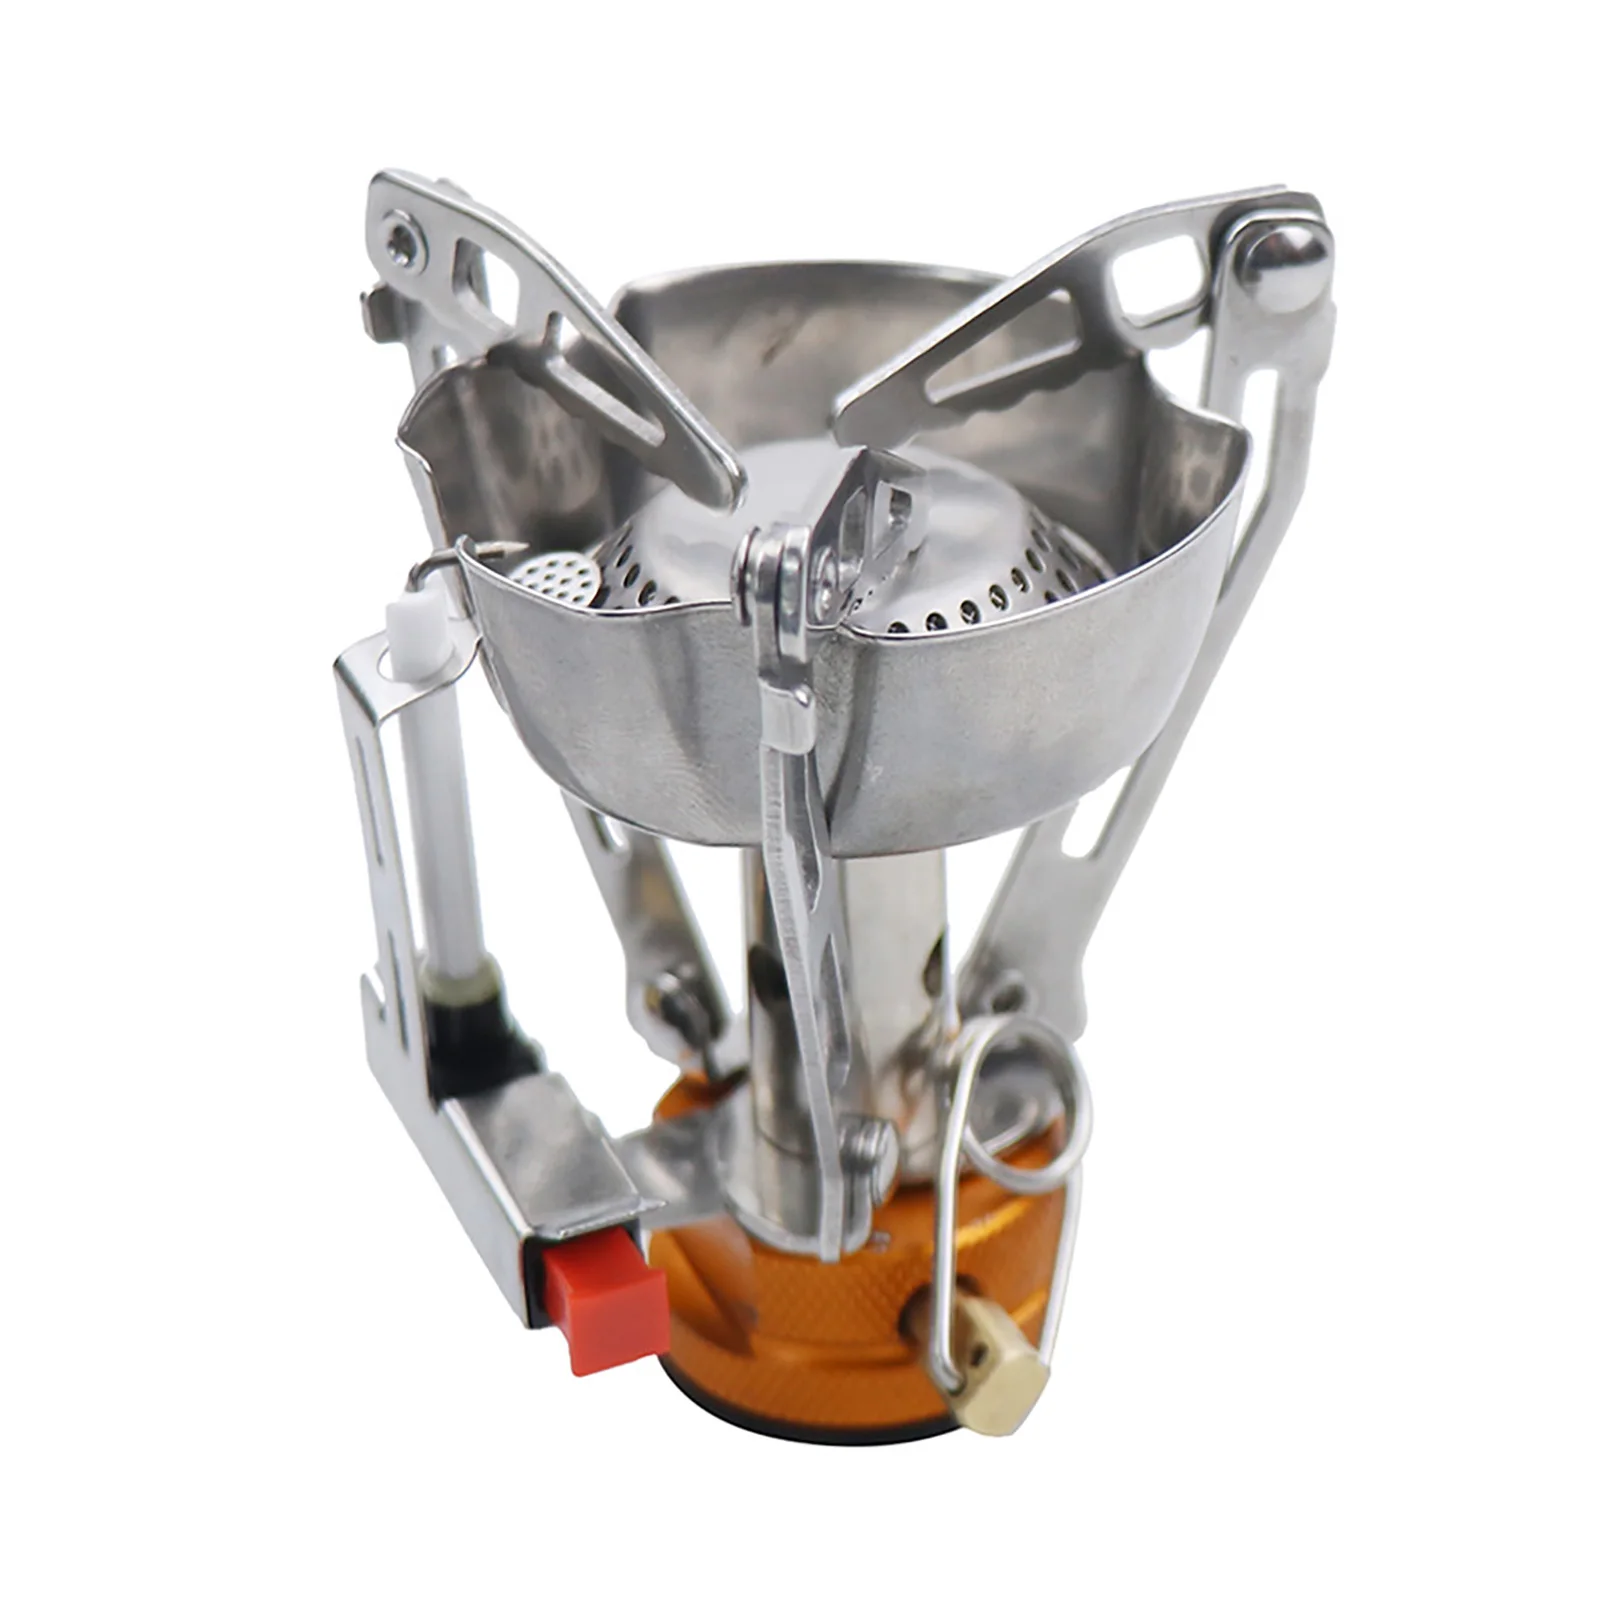 

Mini Stove Head Portable Camping Gas Stove Mini Stove Ignition Adjuatble Valve Hiking Cooking Outdoor Backpacking